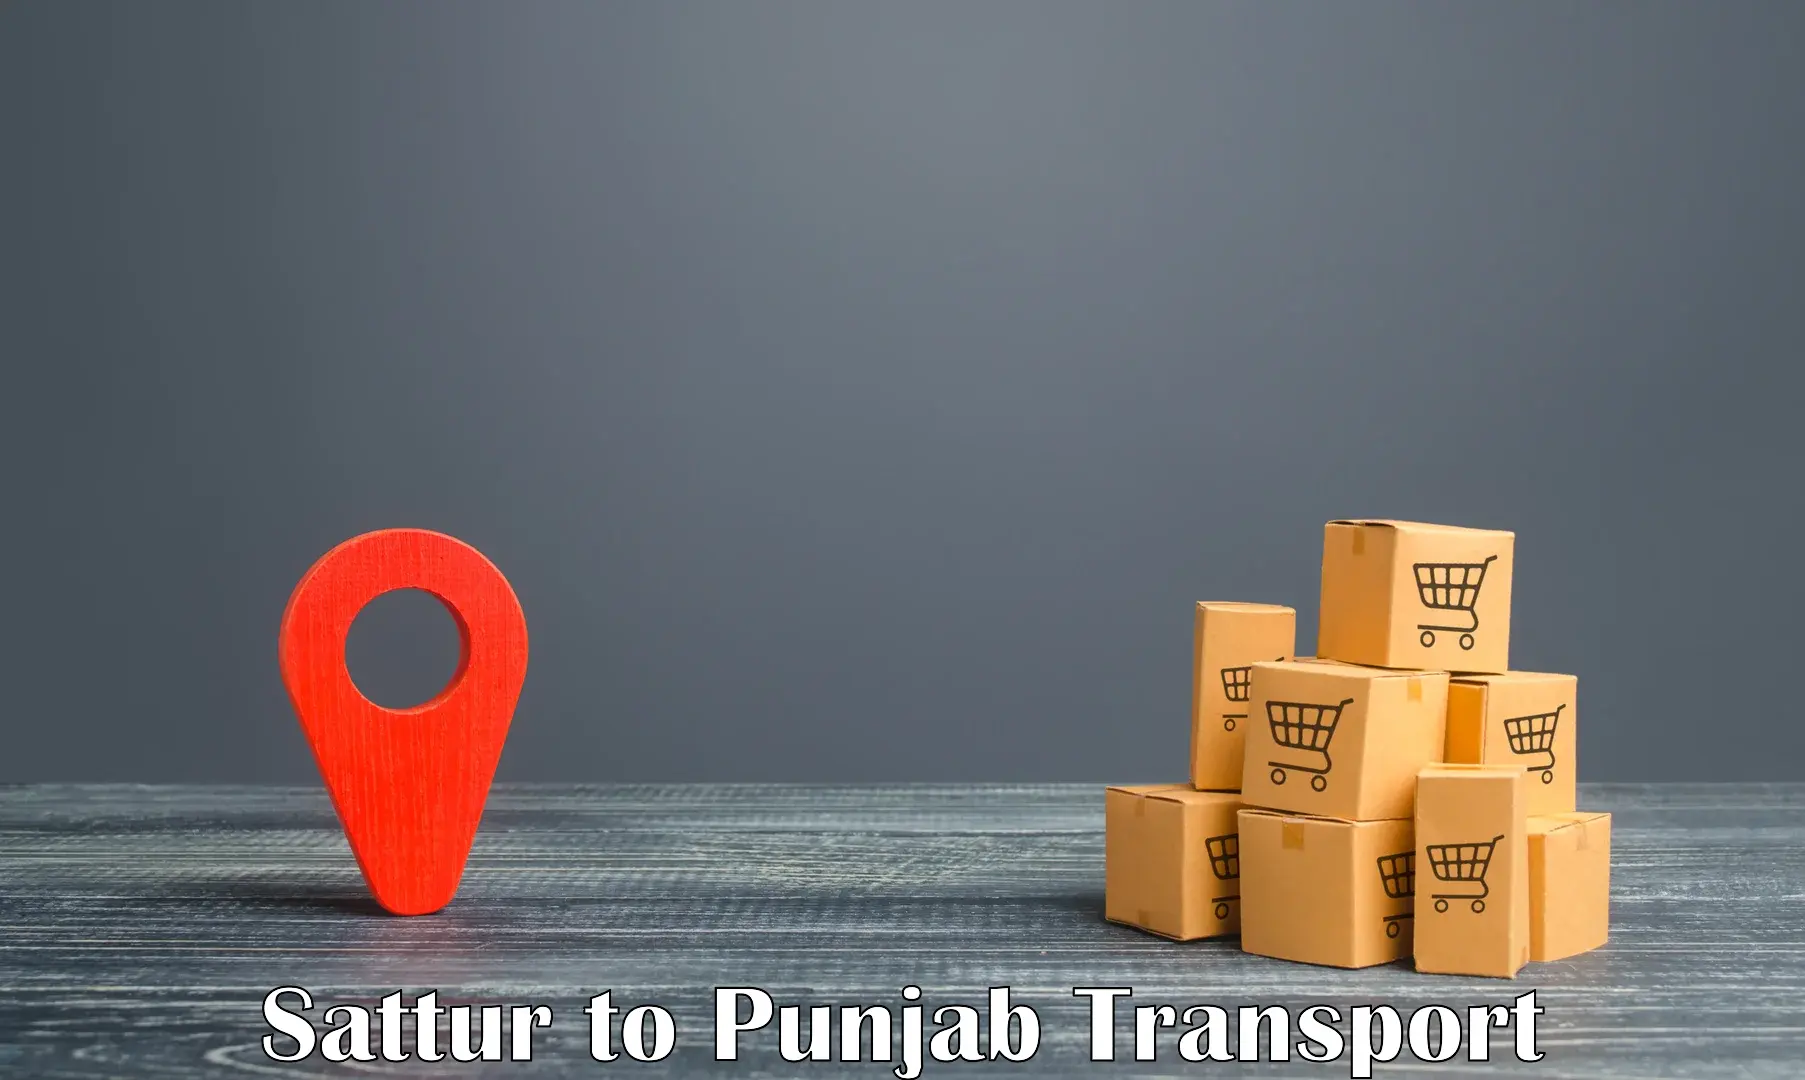 Goods delivery service Sattur to Faridkot